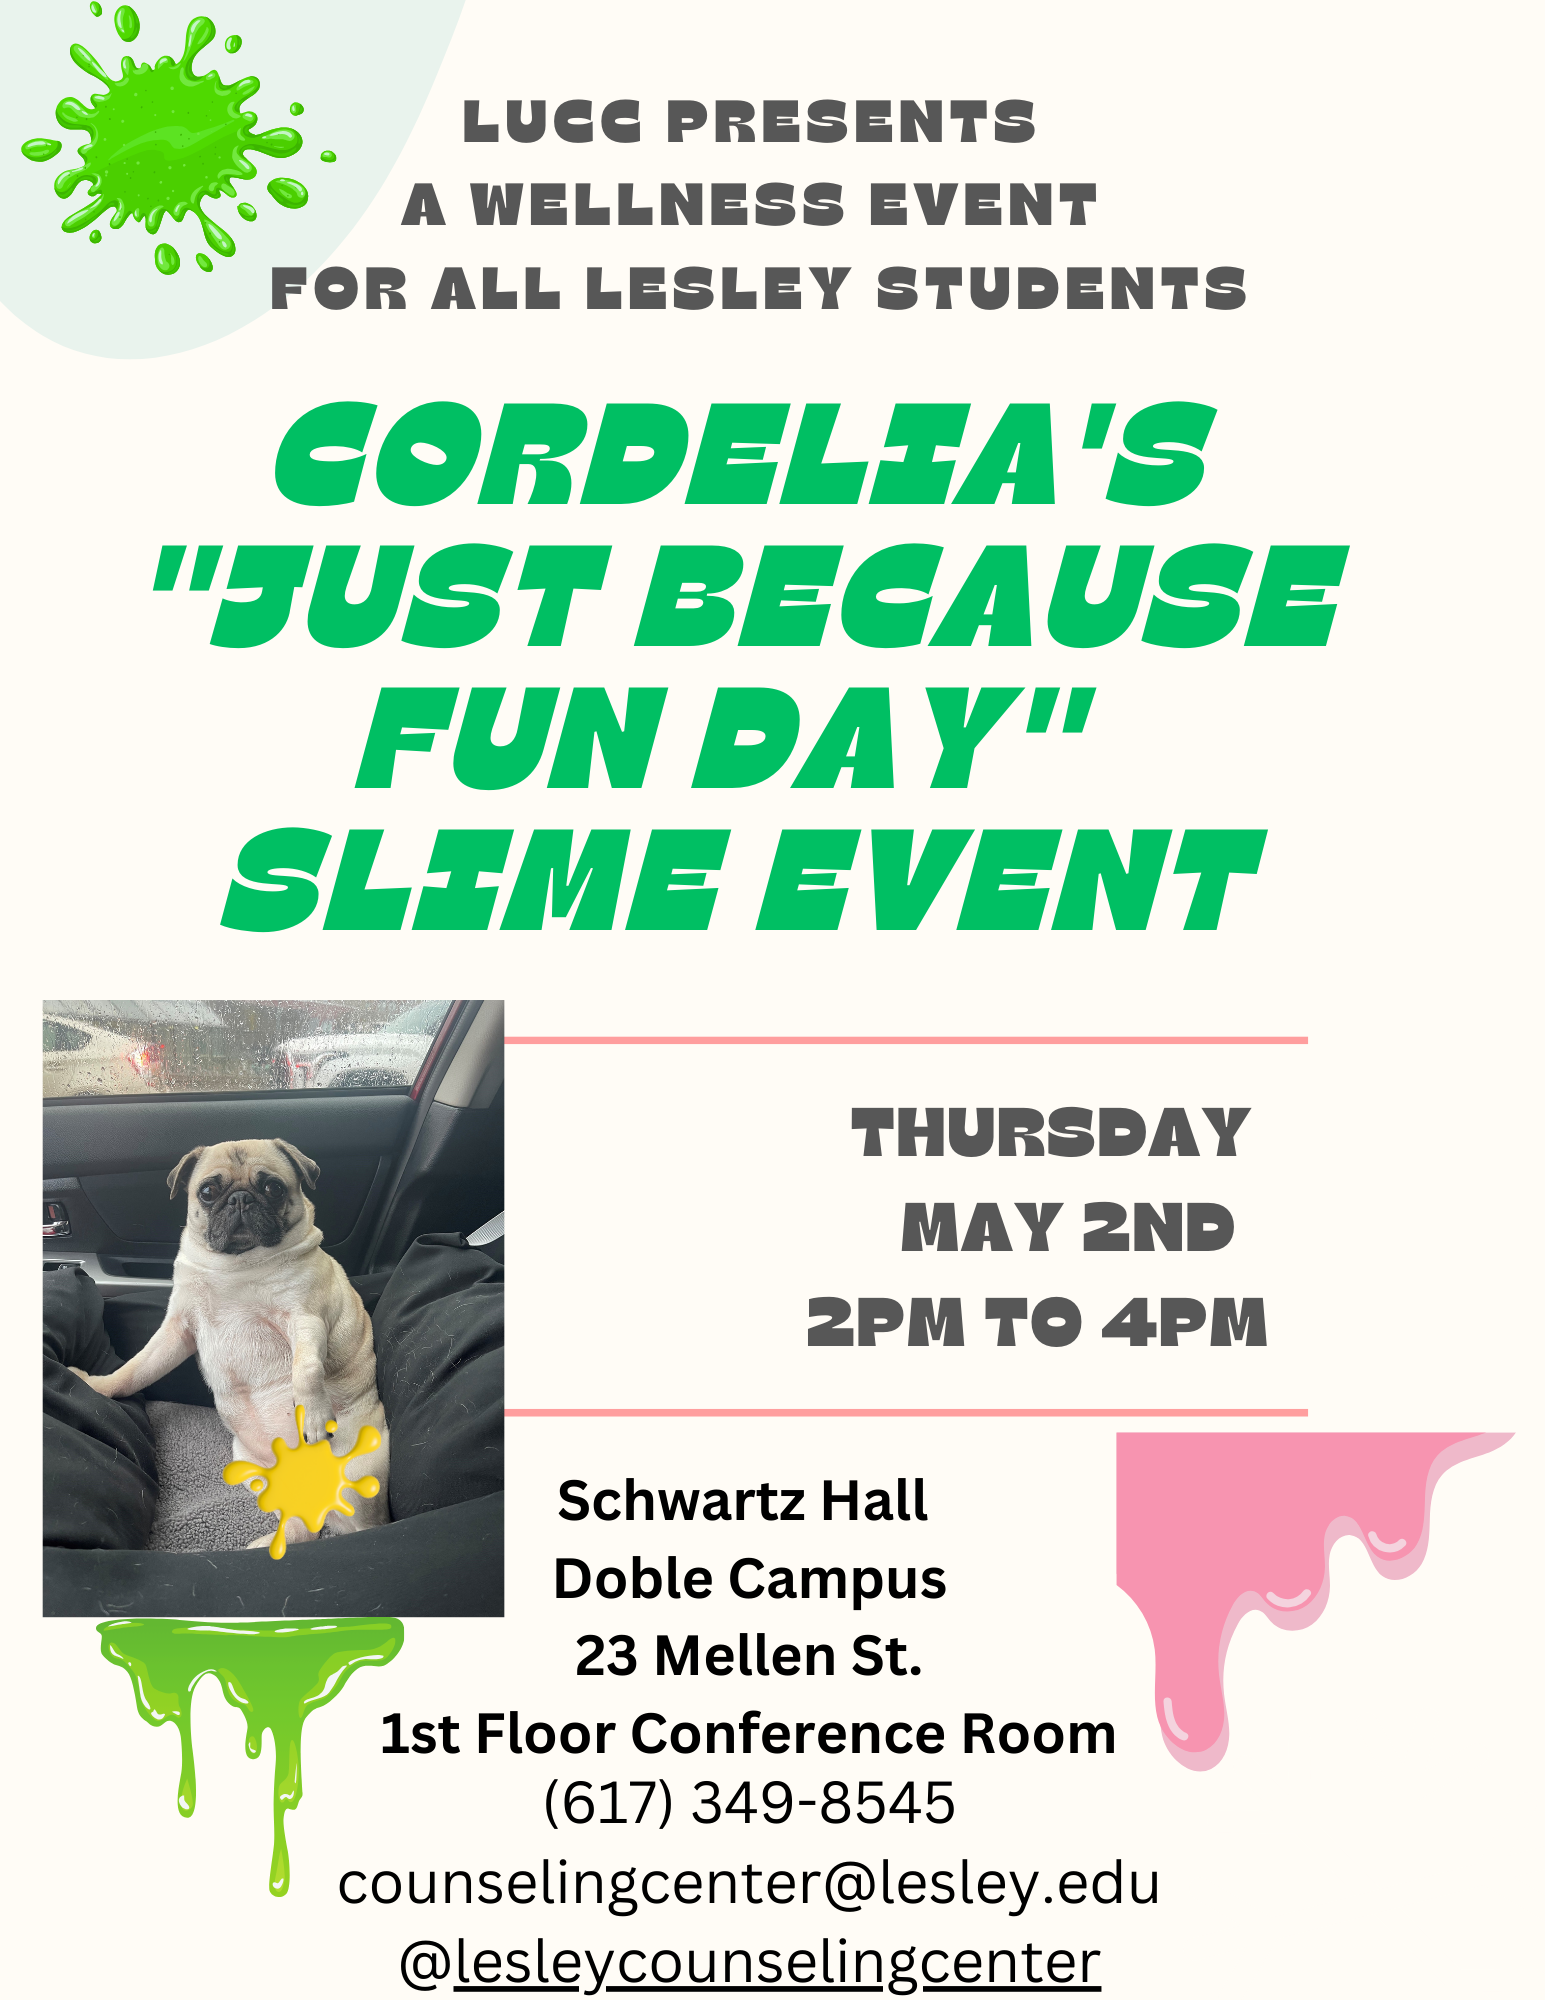 Cordelia's "Just Because Fun Day" Slime Event Poster